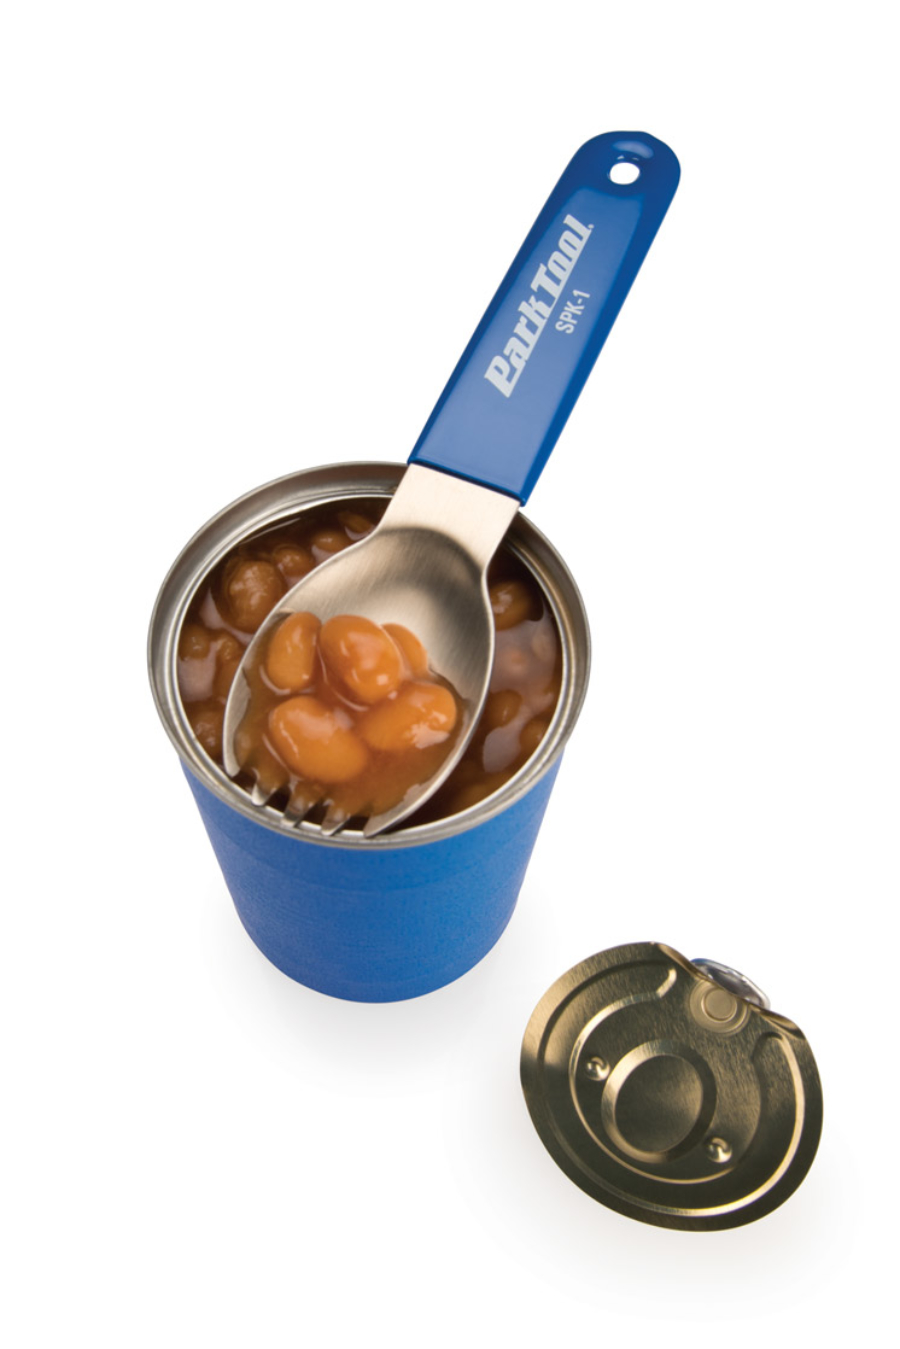 The Park Tool SPK-1 Stainless Steel Spork in a can of beans, enlarged